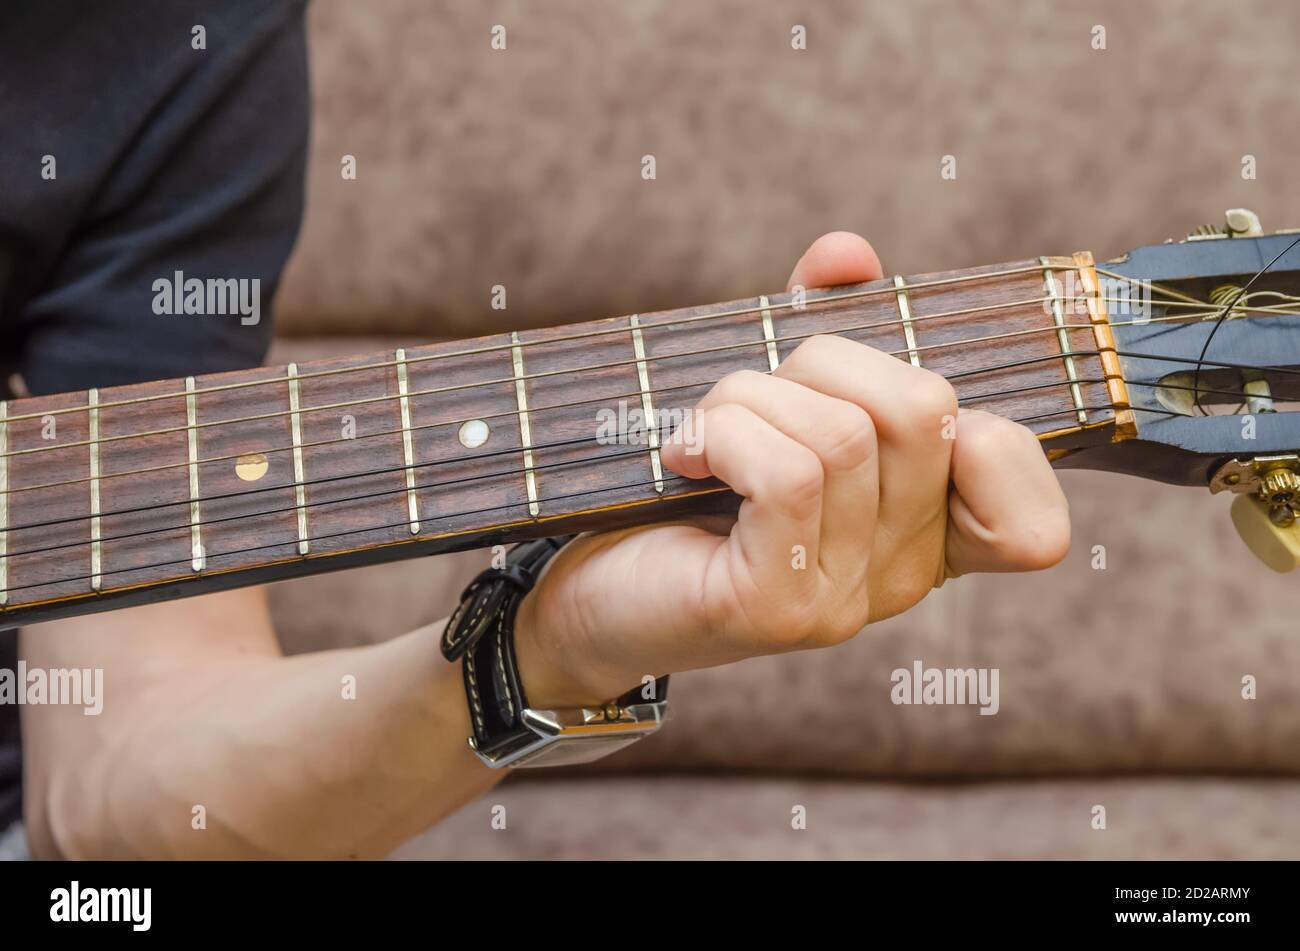 Close-up of a guitarist's hand on an acoustic guitar. Guitar player's hand on the fretboard of an acoustic guitar close-up Stock Photo